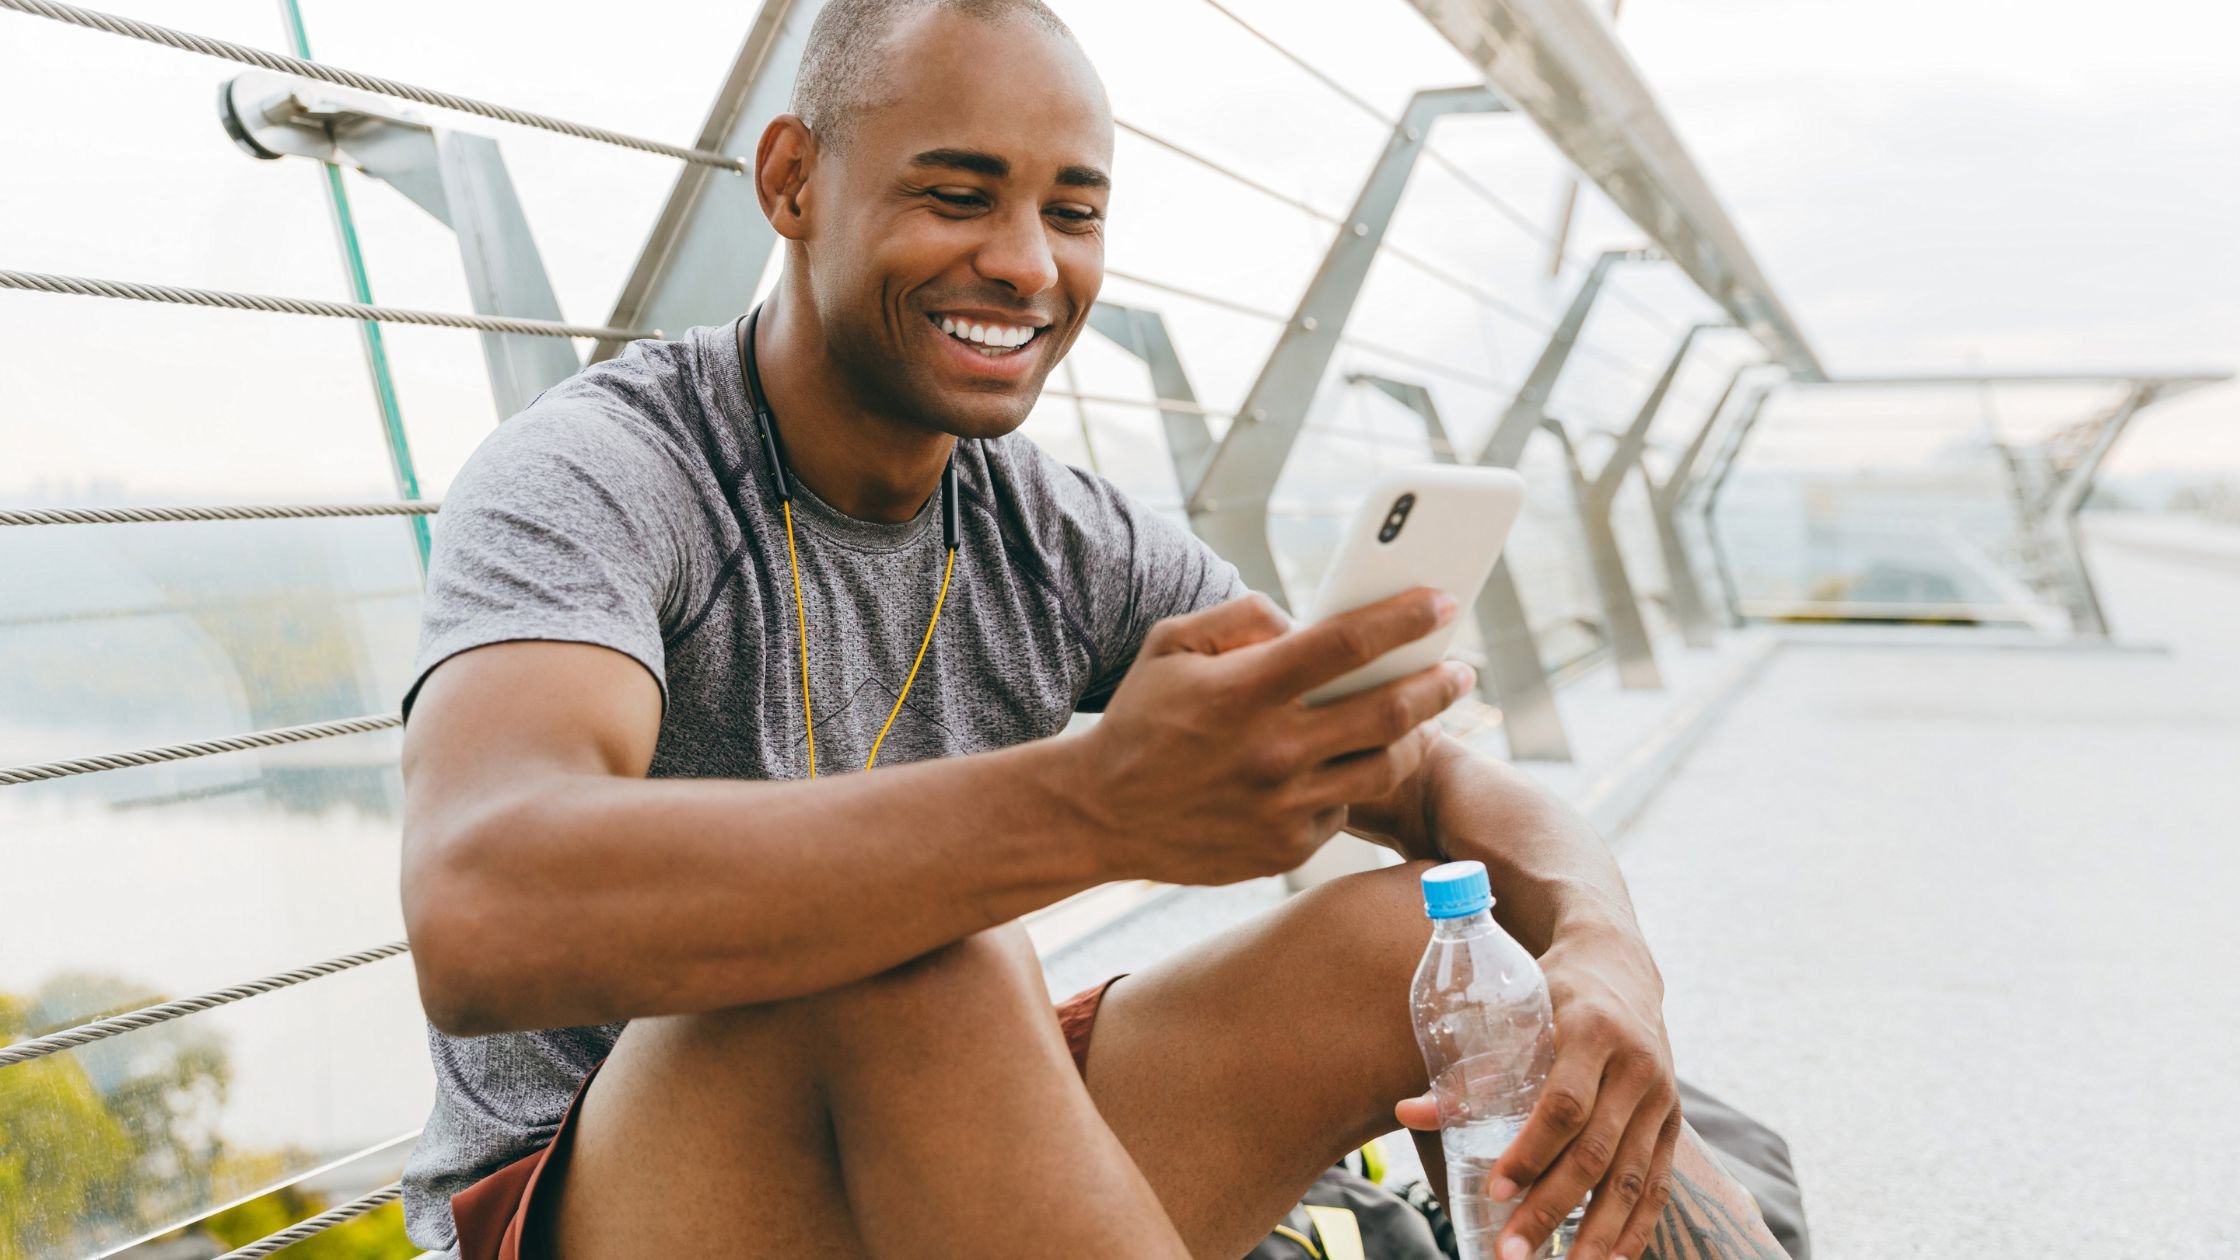 Man in sports gear looking at mobile on a cable bridge holding a bottle of water smiling